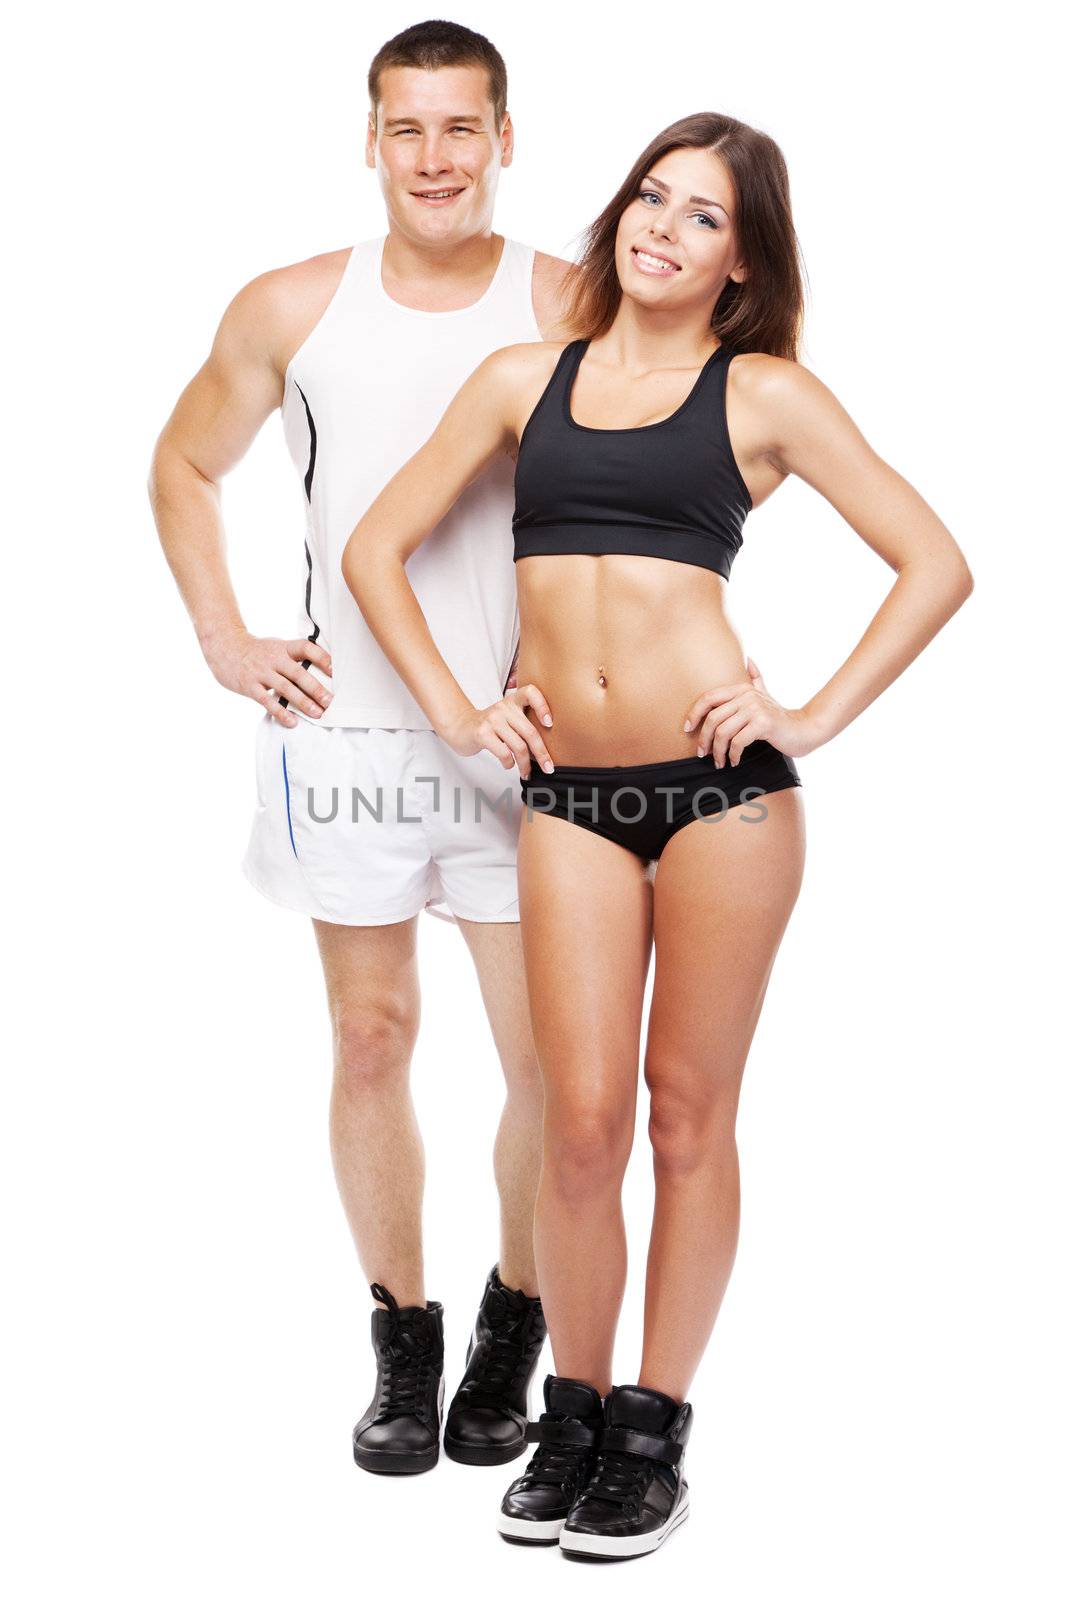 Beautiful healthy-looking young couple in sports outfit